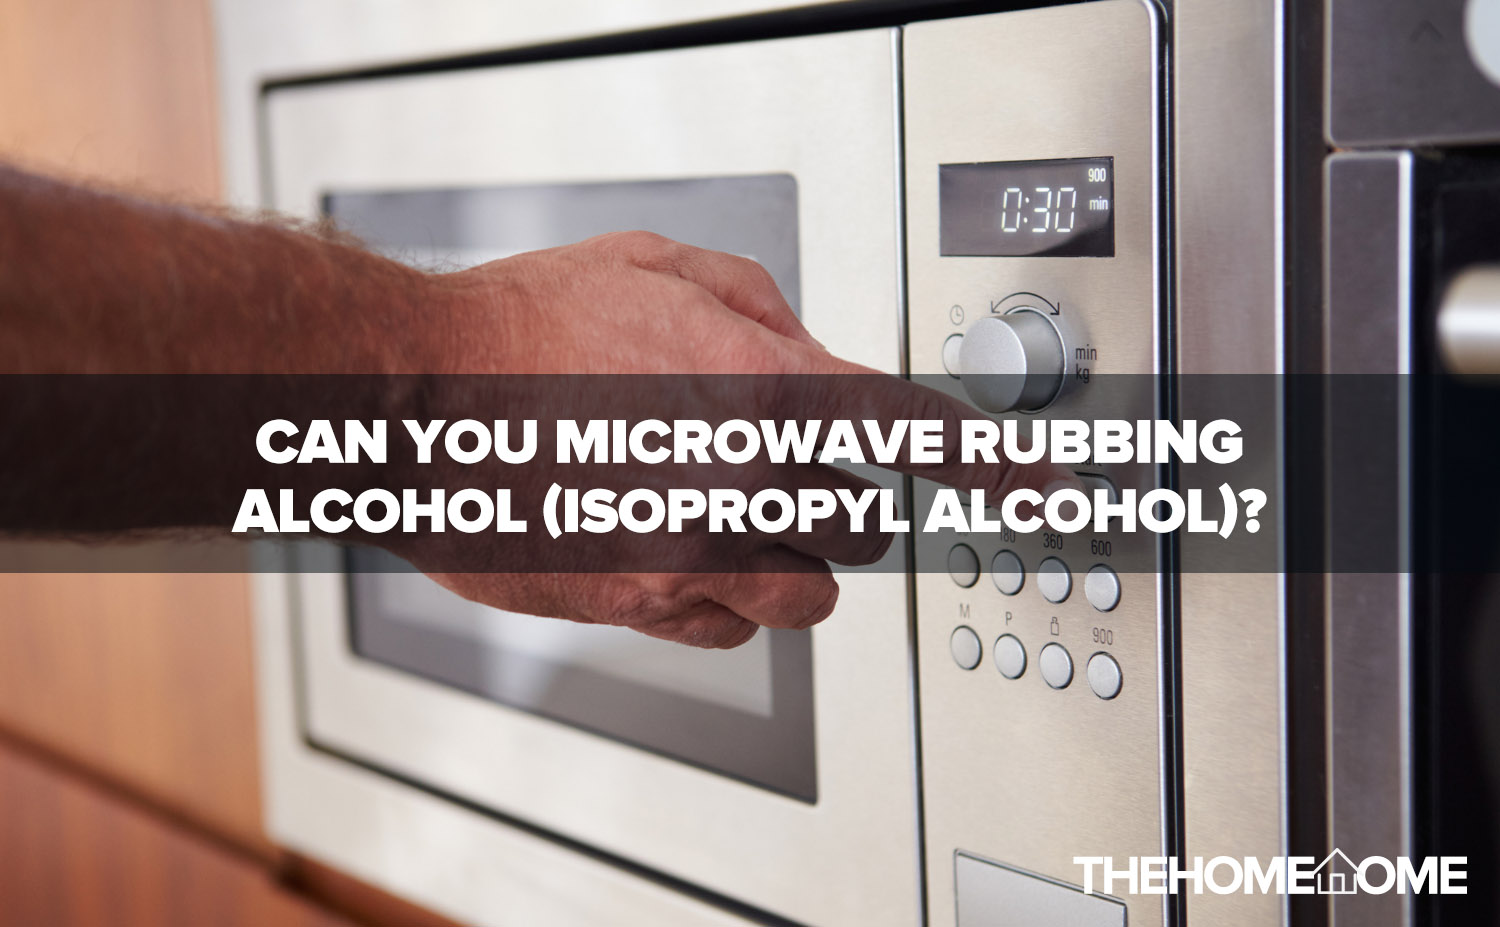 Can You Microwave Isopropyl Alcohol?